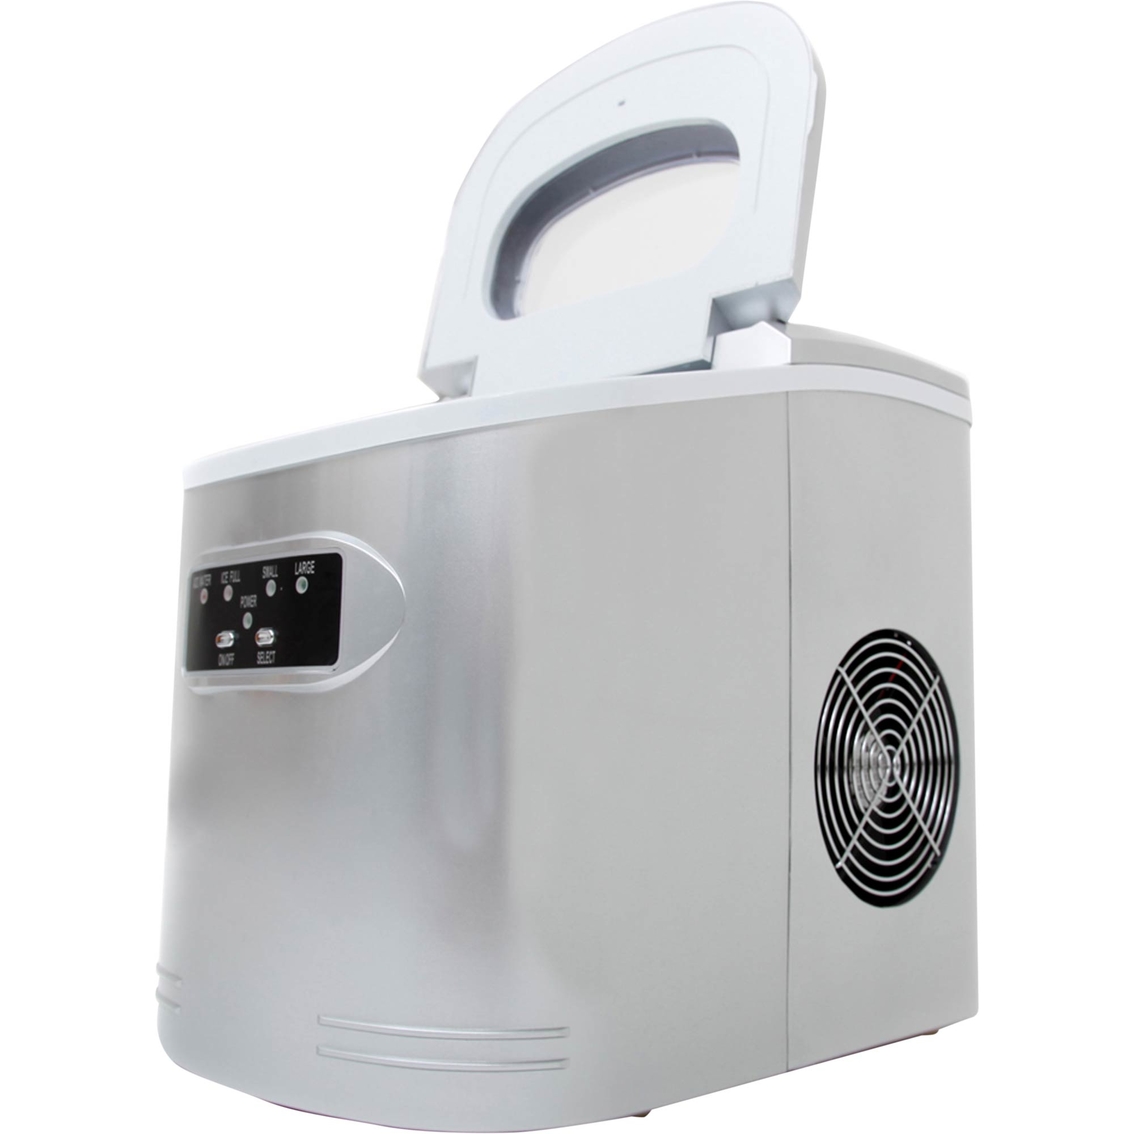 Whynter Compact Portable Ice Maker with 27 lb. Capacity - Image 2 of 4